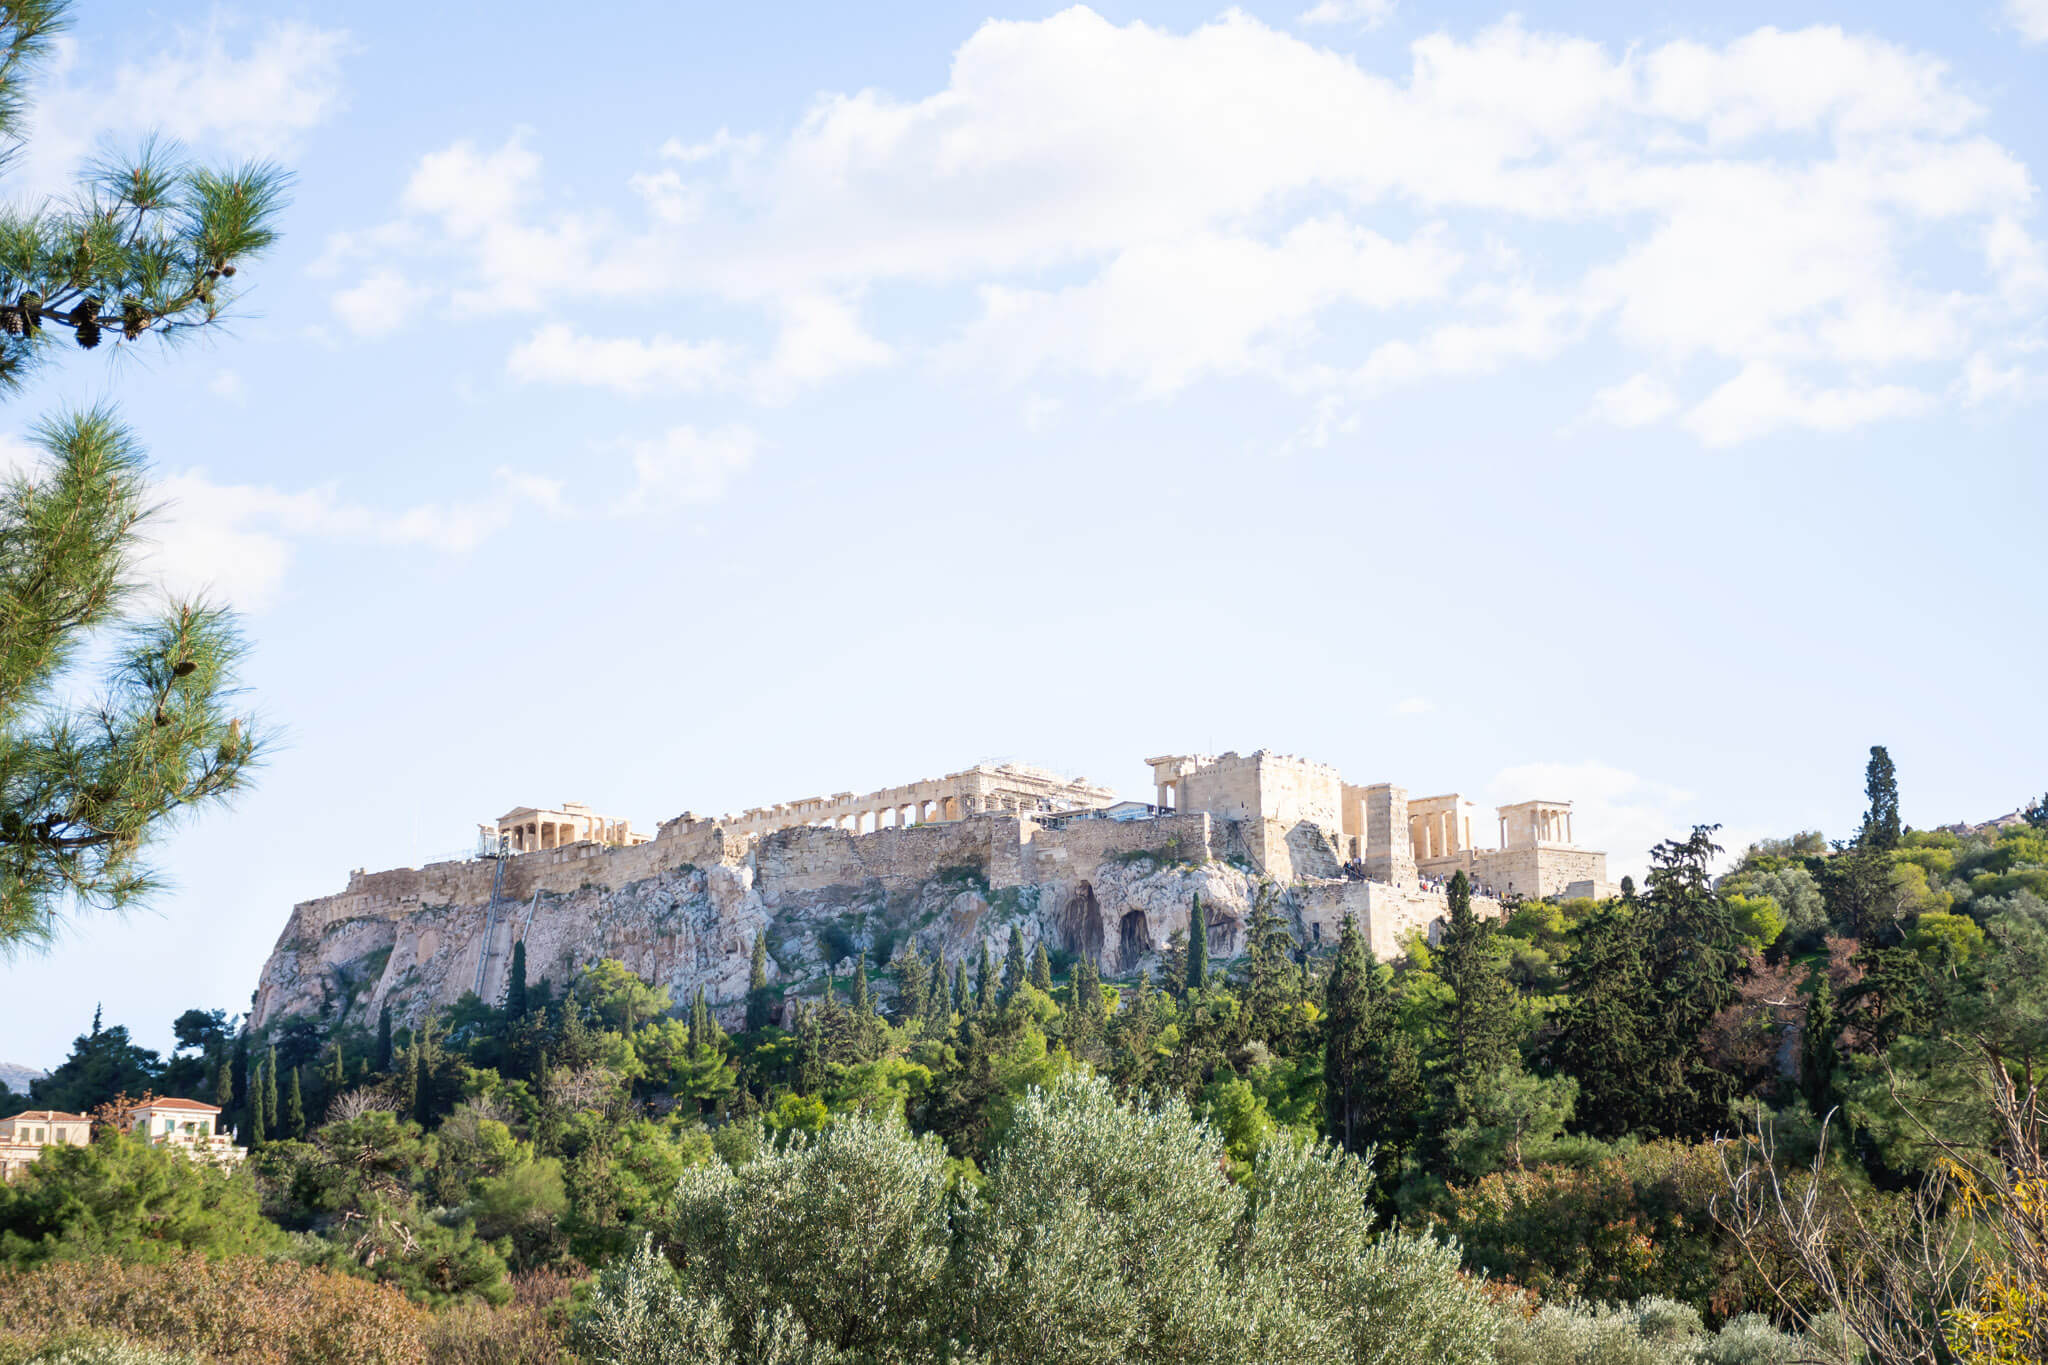 View of Acropolis from the Agora of Ancient Athens 